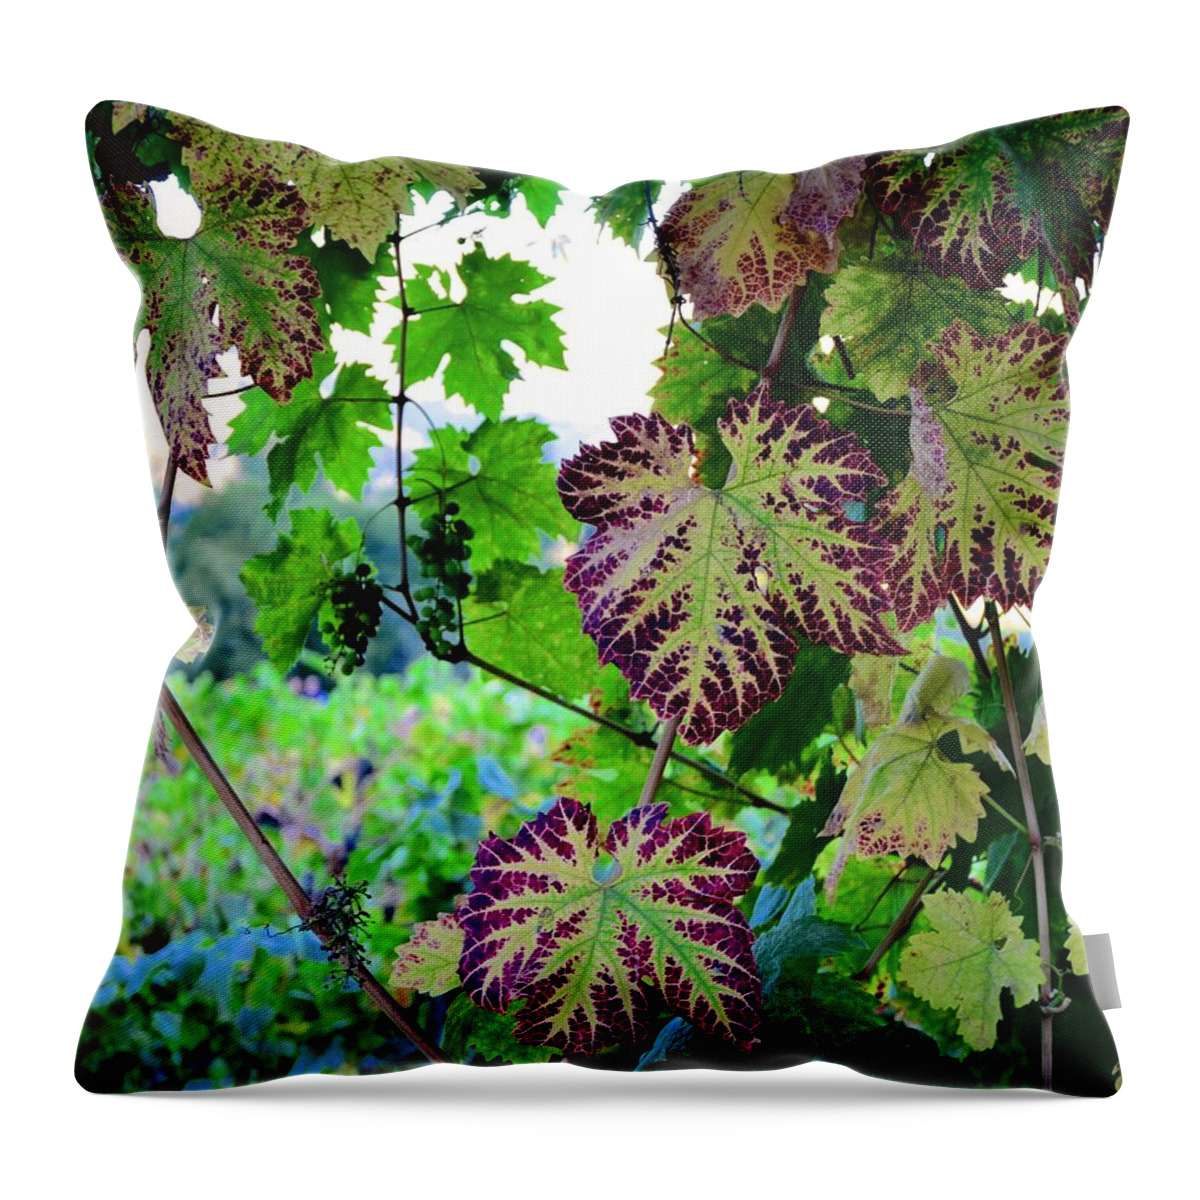 Grapes Throw Pillow featuring the photograph The Grape Vine by Corinne Rhode